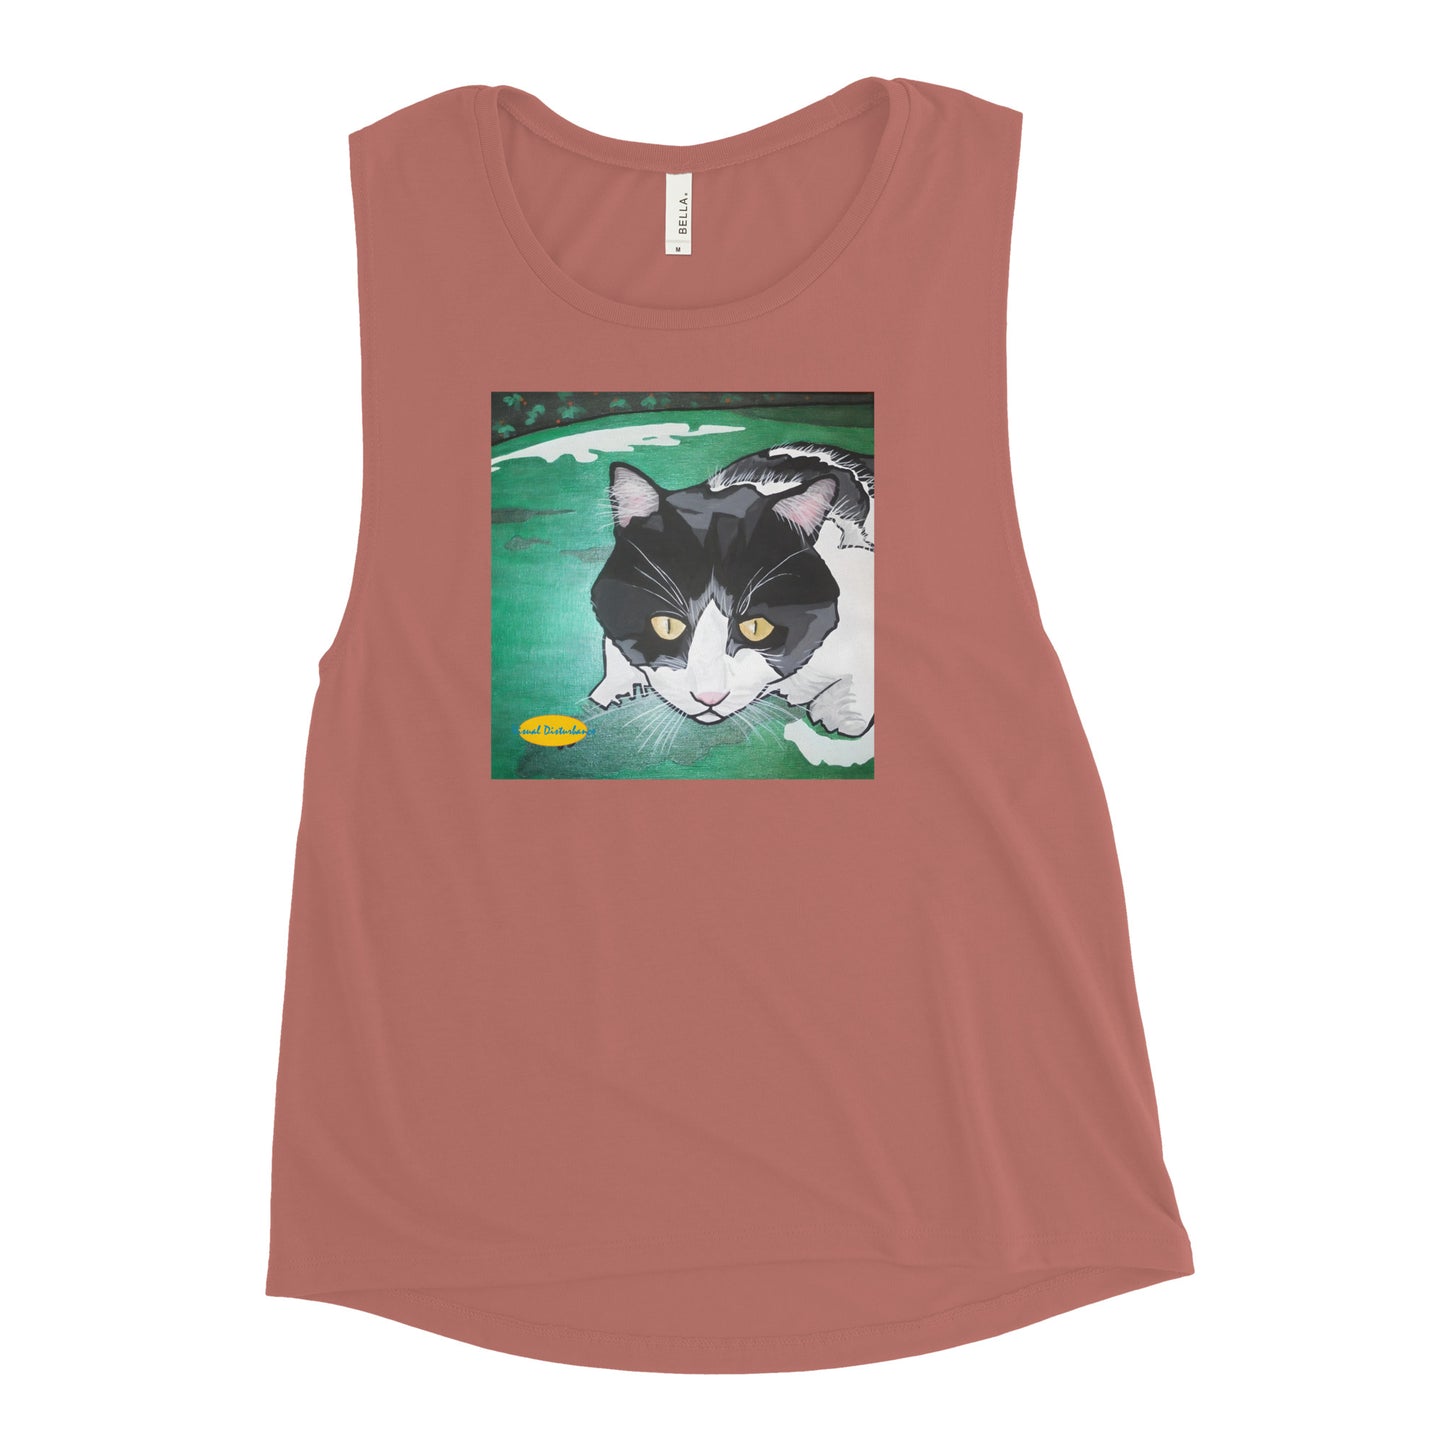 Black and White Cat in Green Grass Ladies’ Muscle Tank